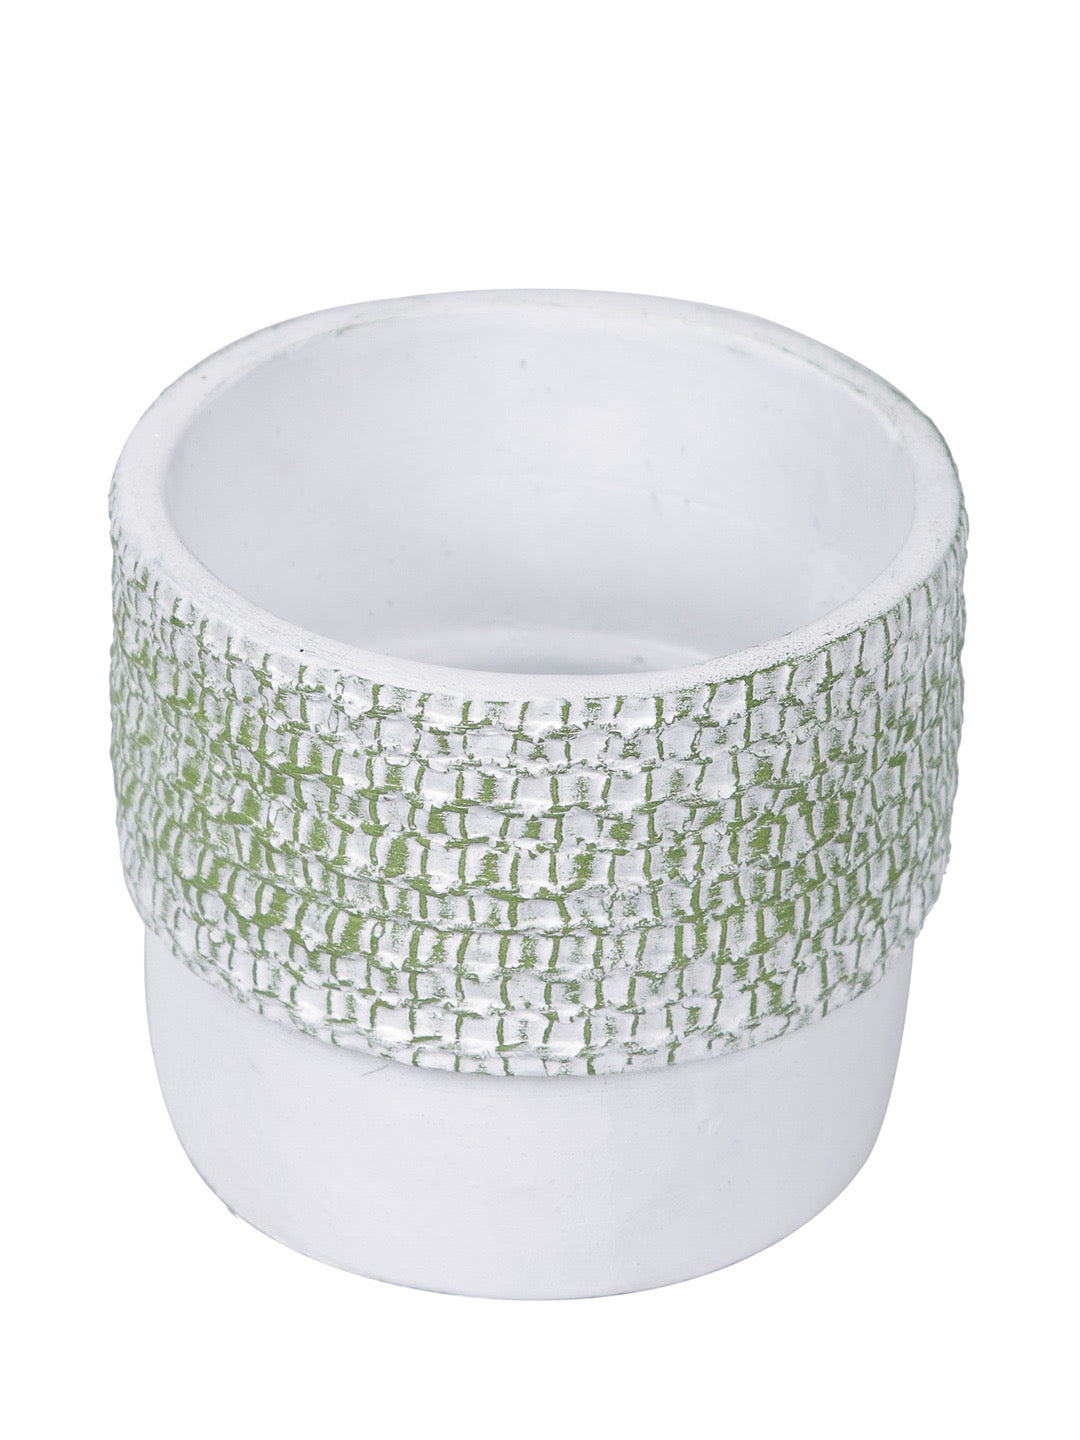 White Planter with Green Textured effect - Default Title (CHC22329GR)